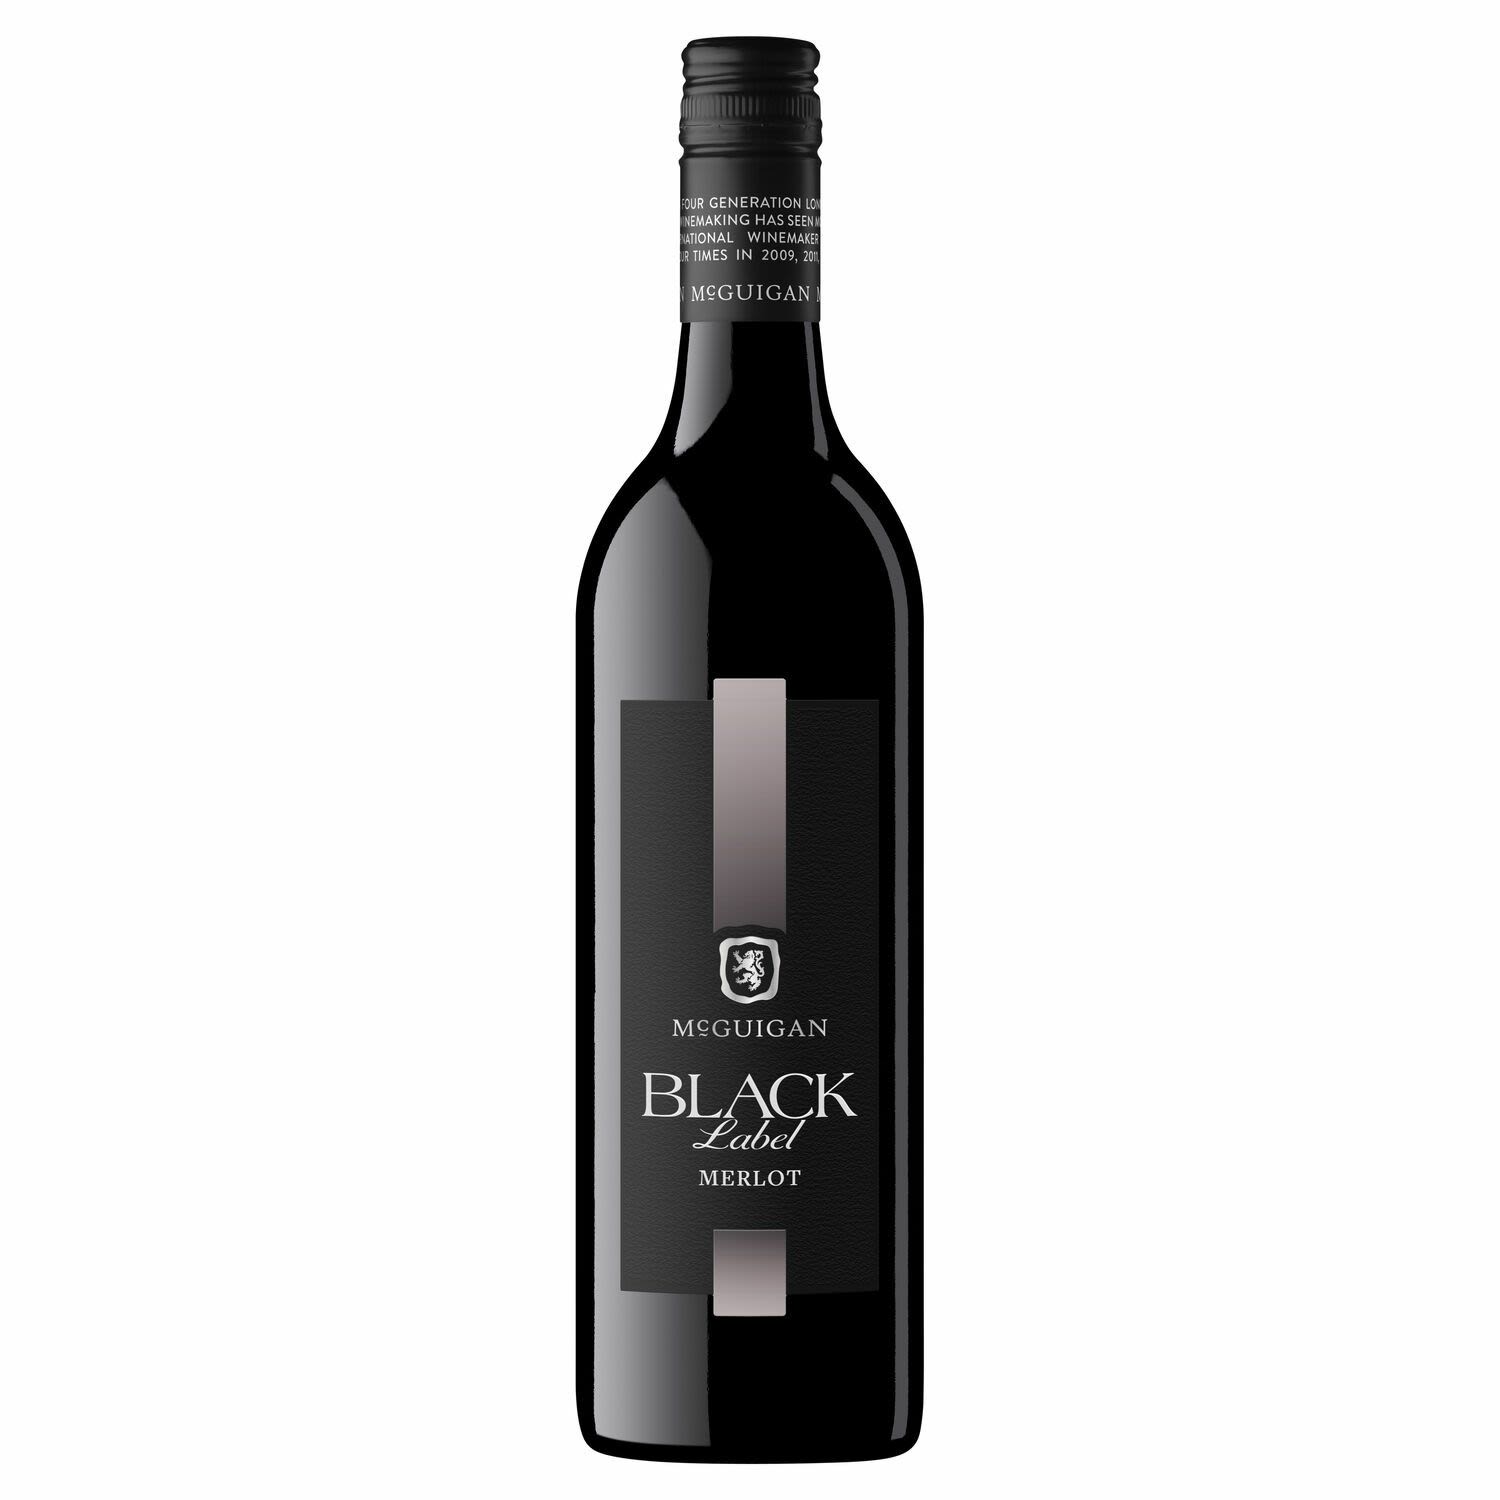 McGuigan Black Label Merlot is a soft and flavoursome wine with ripe fruit flavours of raspberry, cherry and plums. This is nicely integrated with the subtle oak characters of toasty spice and vanilla.<br /> <br />Alcohol Volume: 13.50%<br /><br />Pack Format: Bottle<br /><br />Standard Drinks: 8</br /><br />Pack Type: Bottle<br /><br />Country of Origin: Australia<br /><br />Region: South Eastern Australia<br /><br />Vintage: '2018<br />